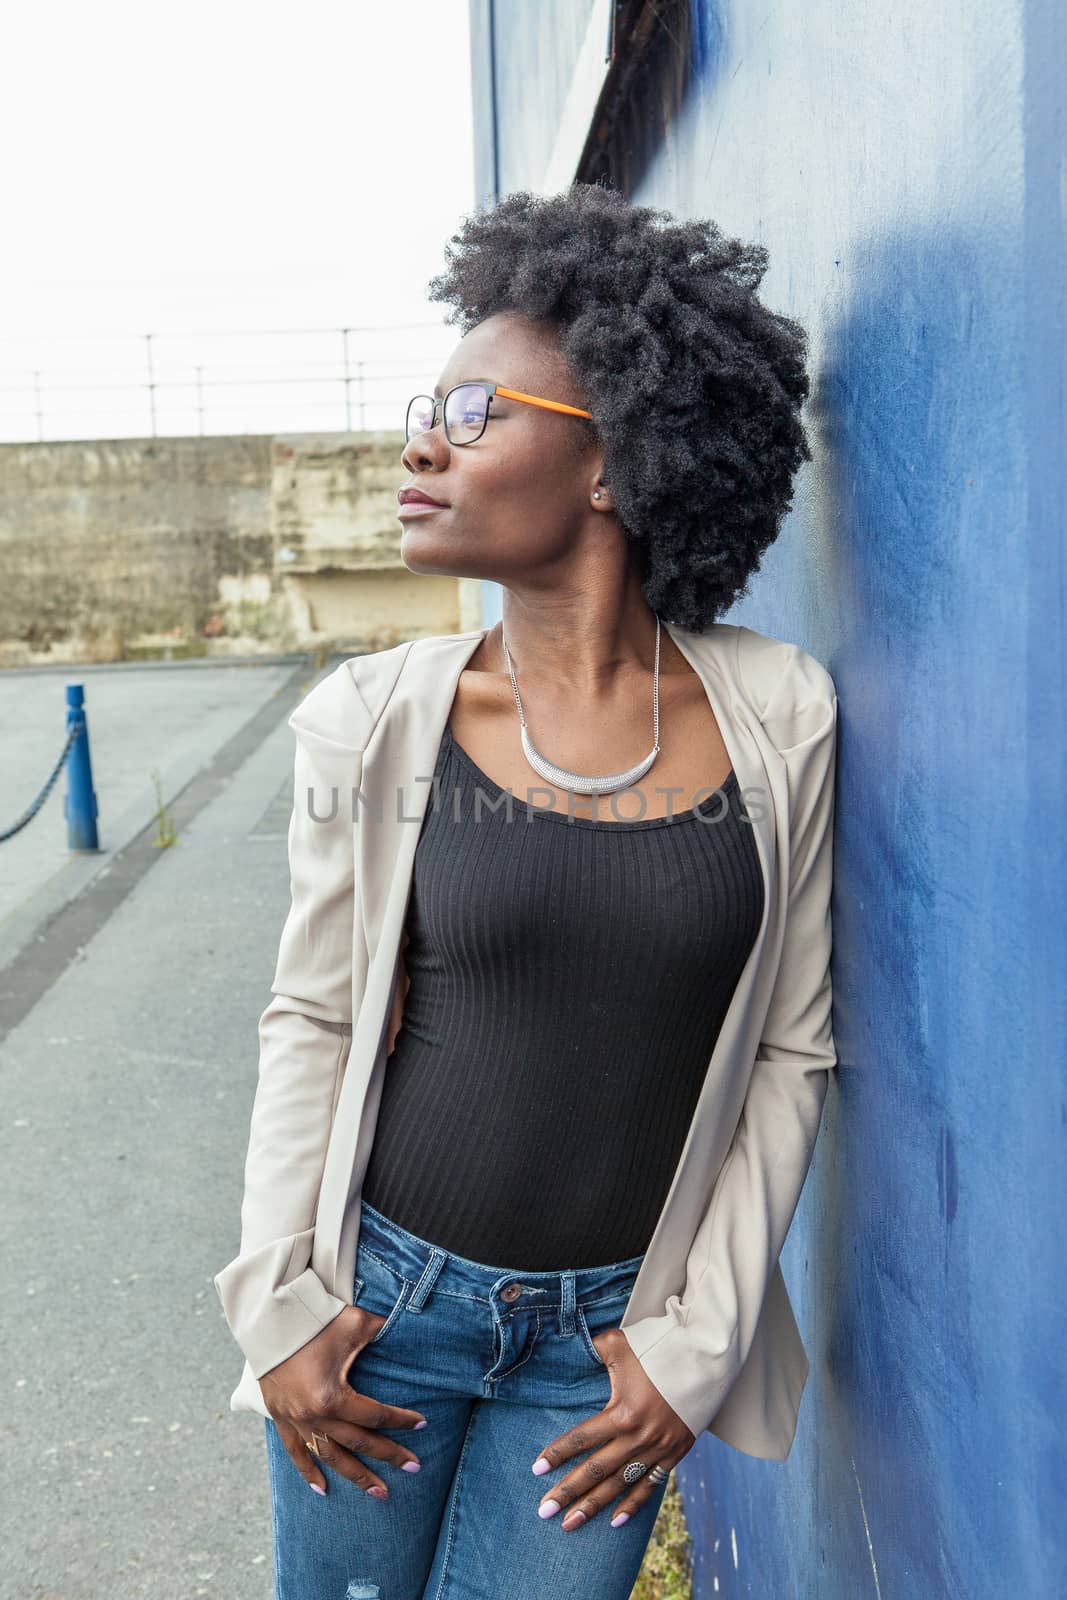 Young African woman standing on a blue wall in the background